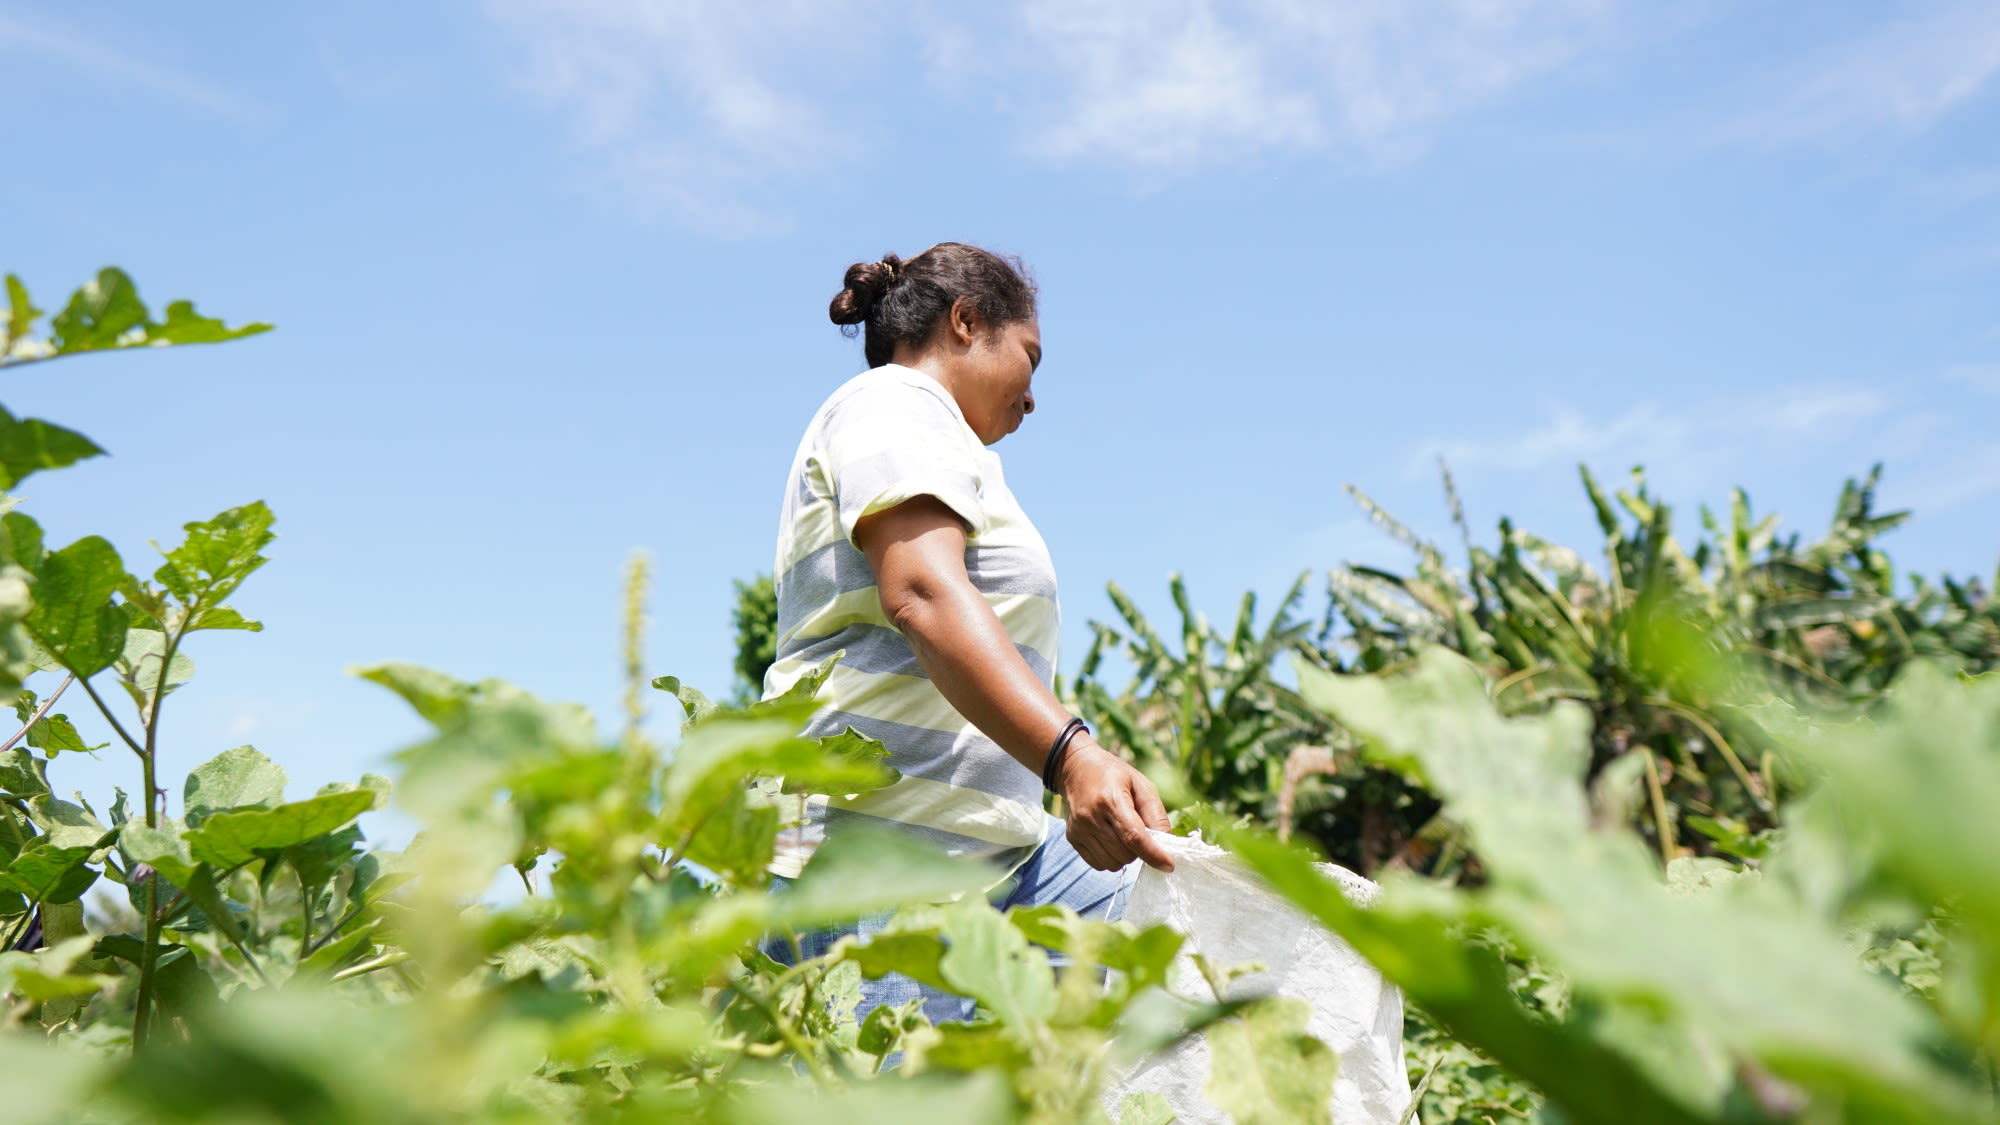 RUNNING HER FARMING BUSINESS HAS MADE ALCINA INDEPENDENT, AS WELL AS HELPING HER PROVIDE A BETTER LIFE FOR HER FAMILY.